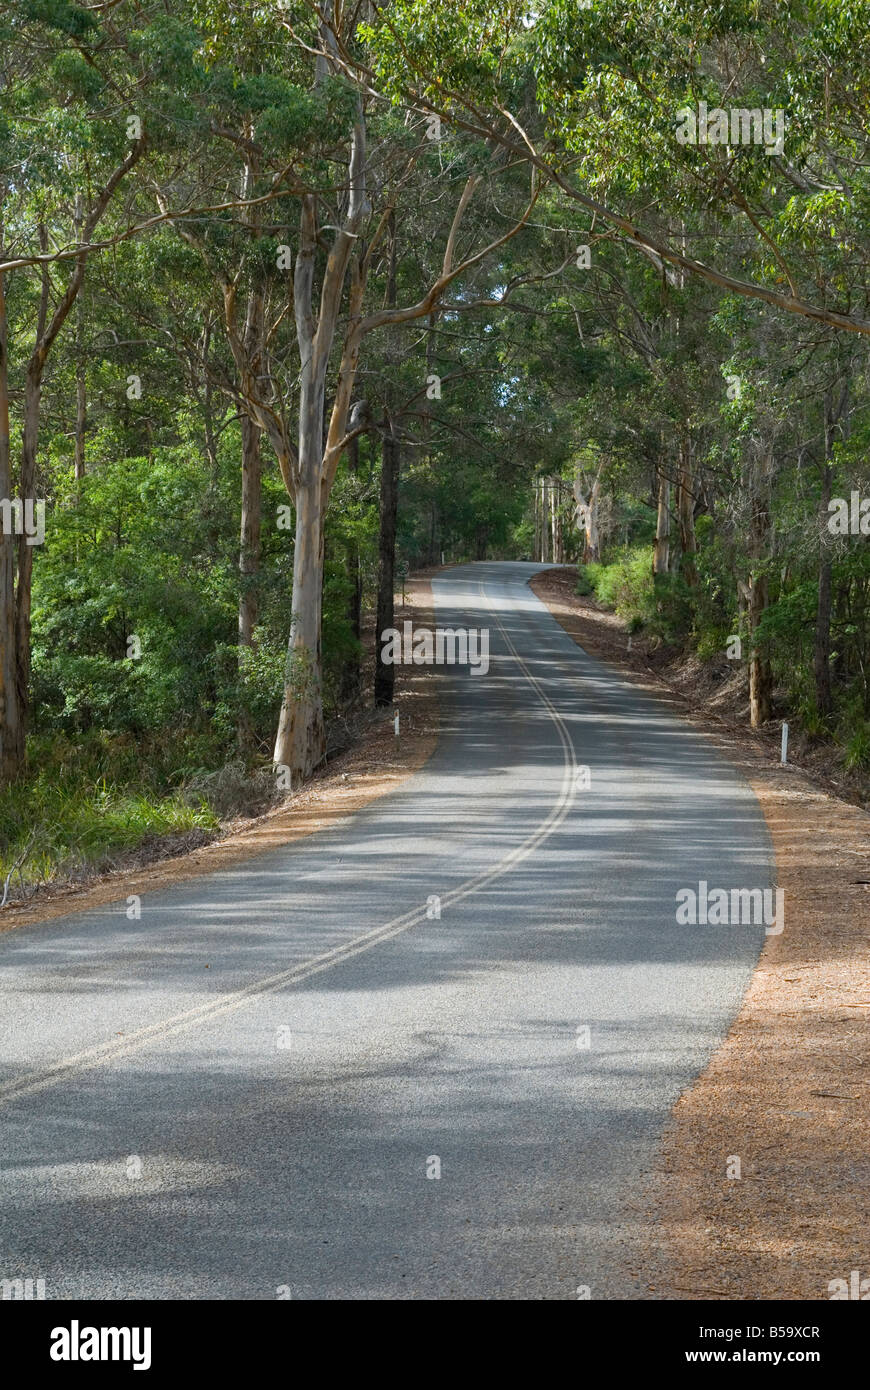 A paved road is shaded with dappled light from surrounding trees along Scotsdale Road Tourist Drive, Denmark, Western Australia Stock Photo